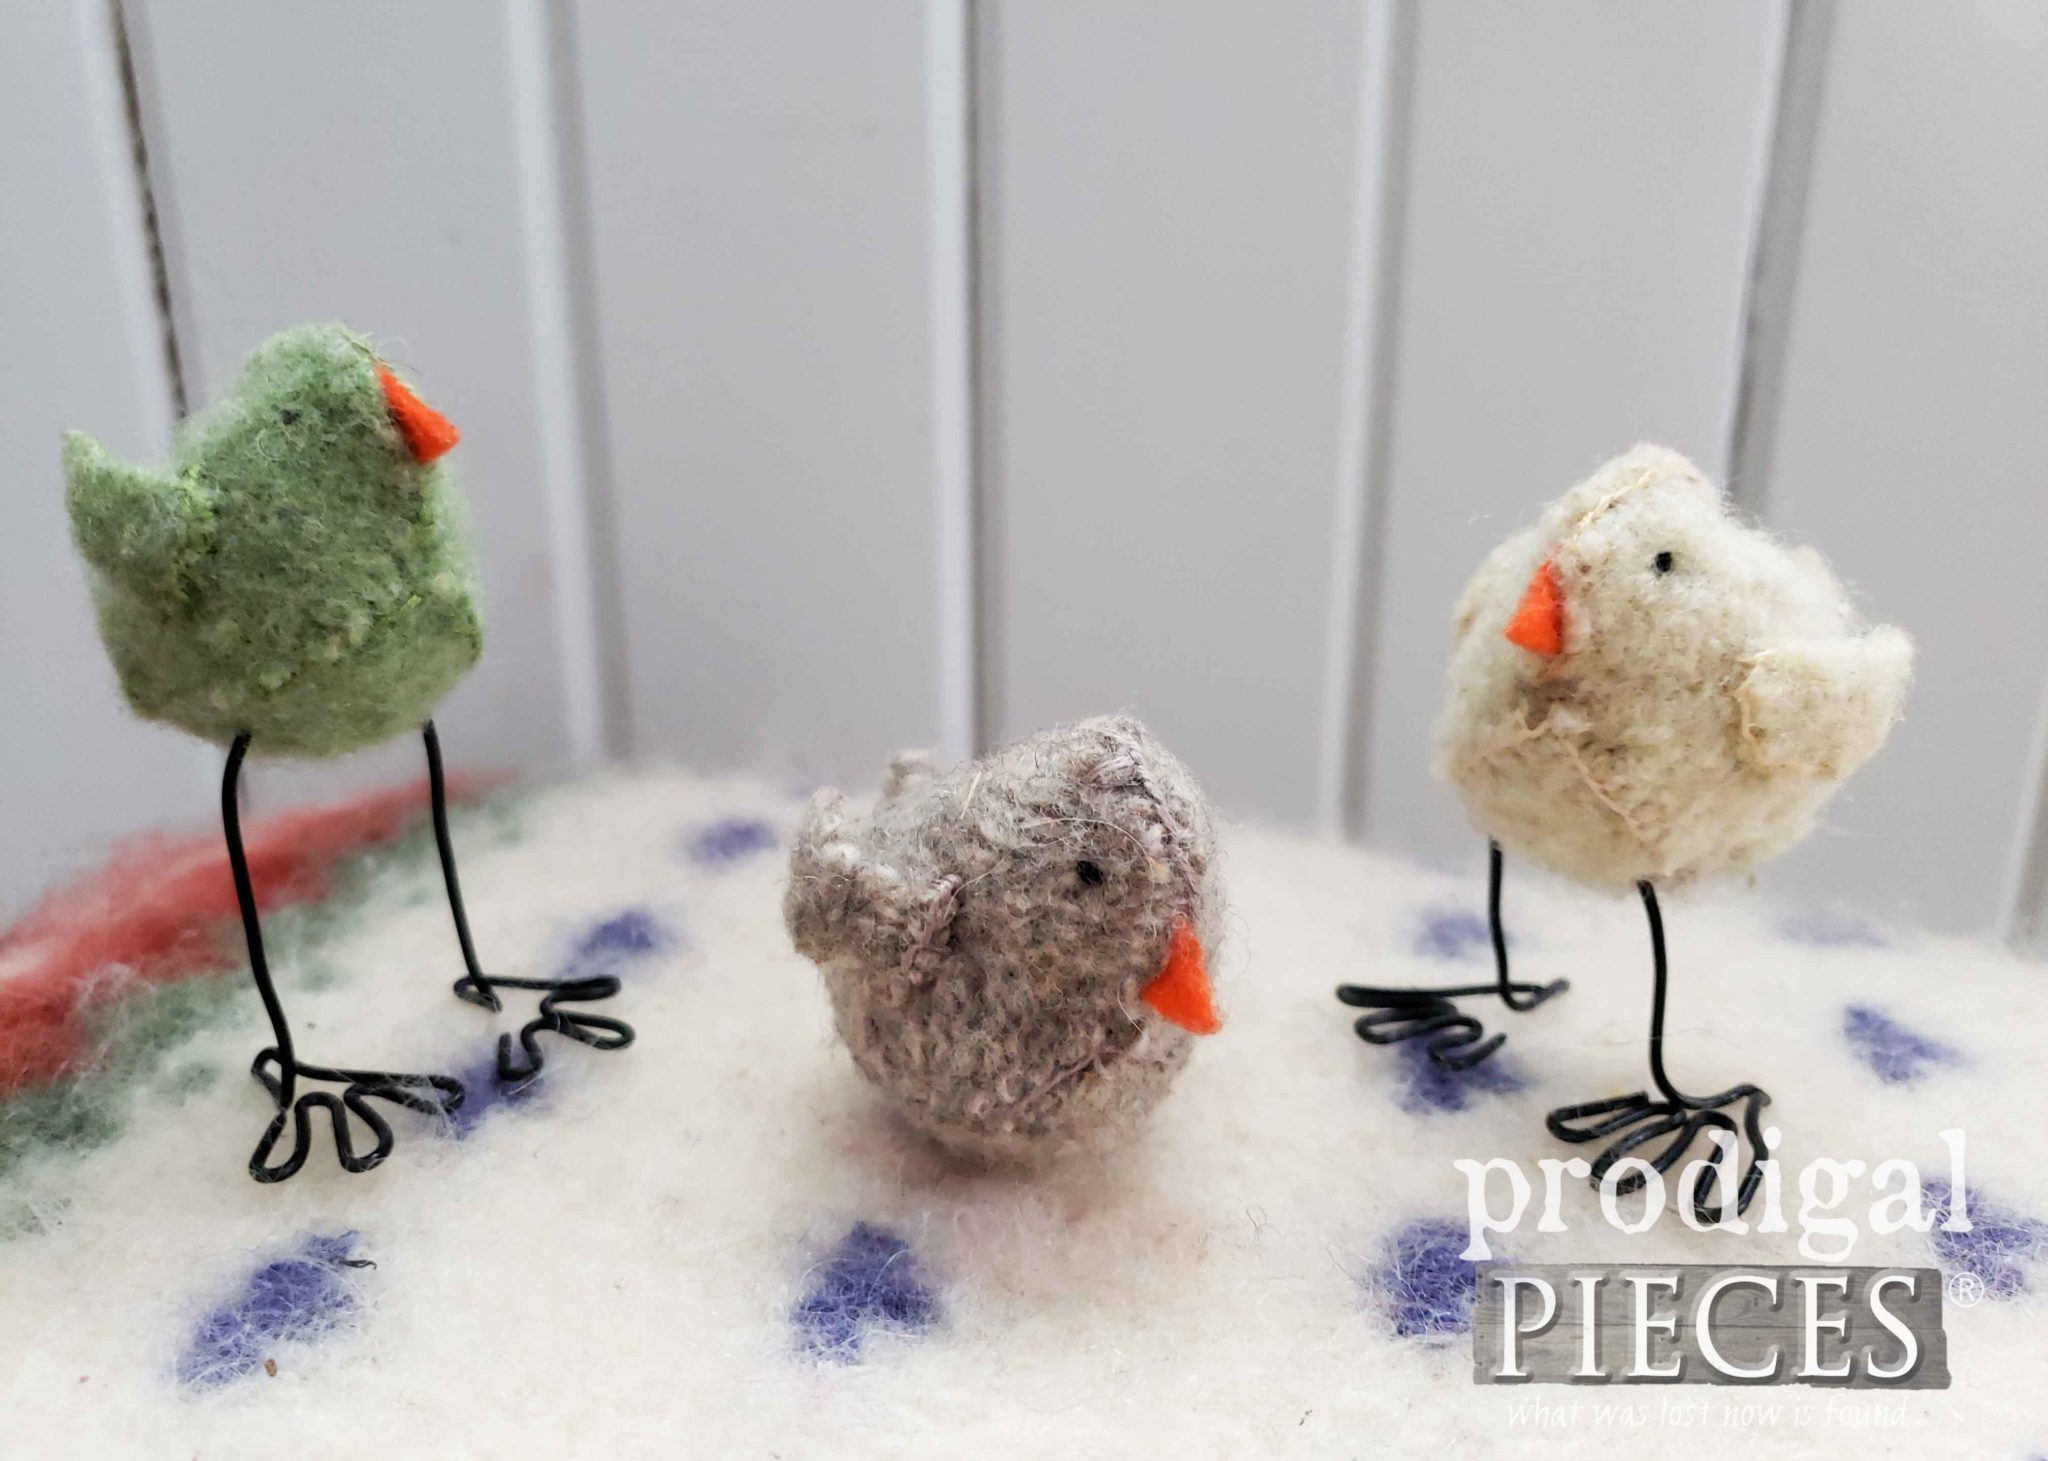 Felted Wool Birds with Wire Legs by Larissa of Prodigal Pieces | prodigalpieces.com #prodigalpieces #handmade #diy #toys